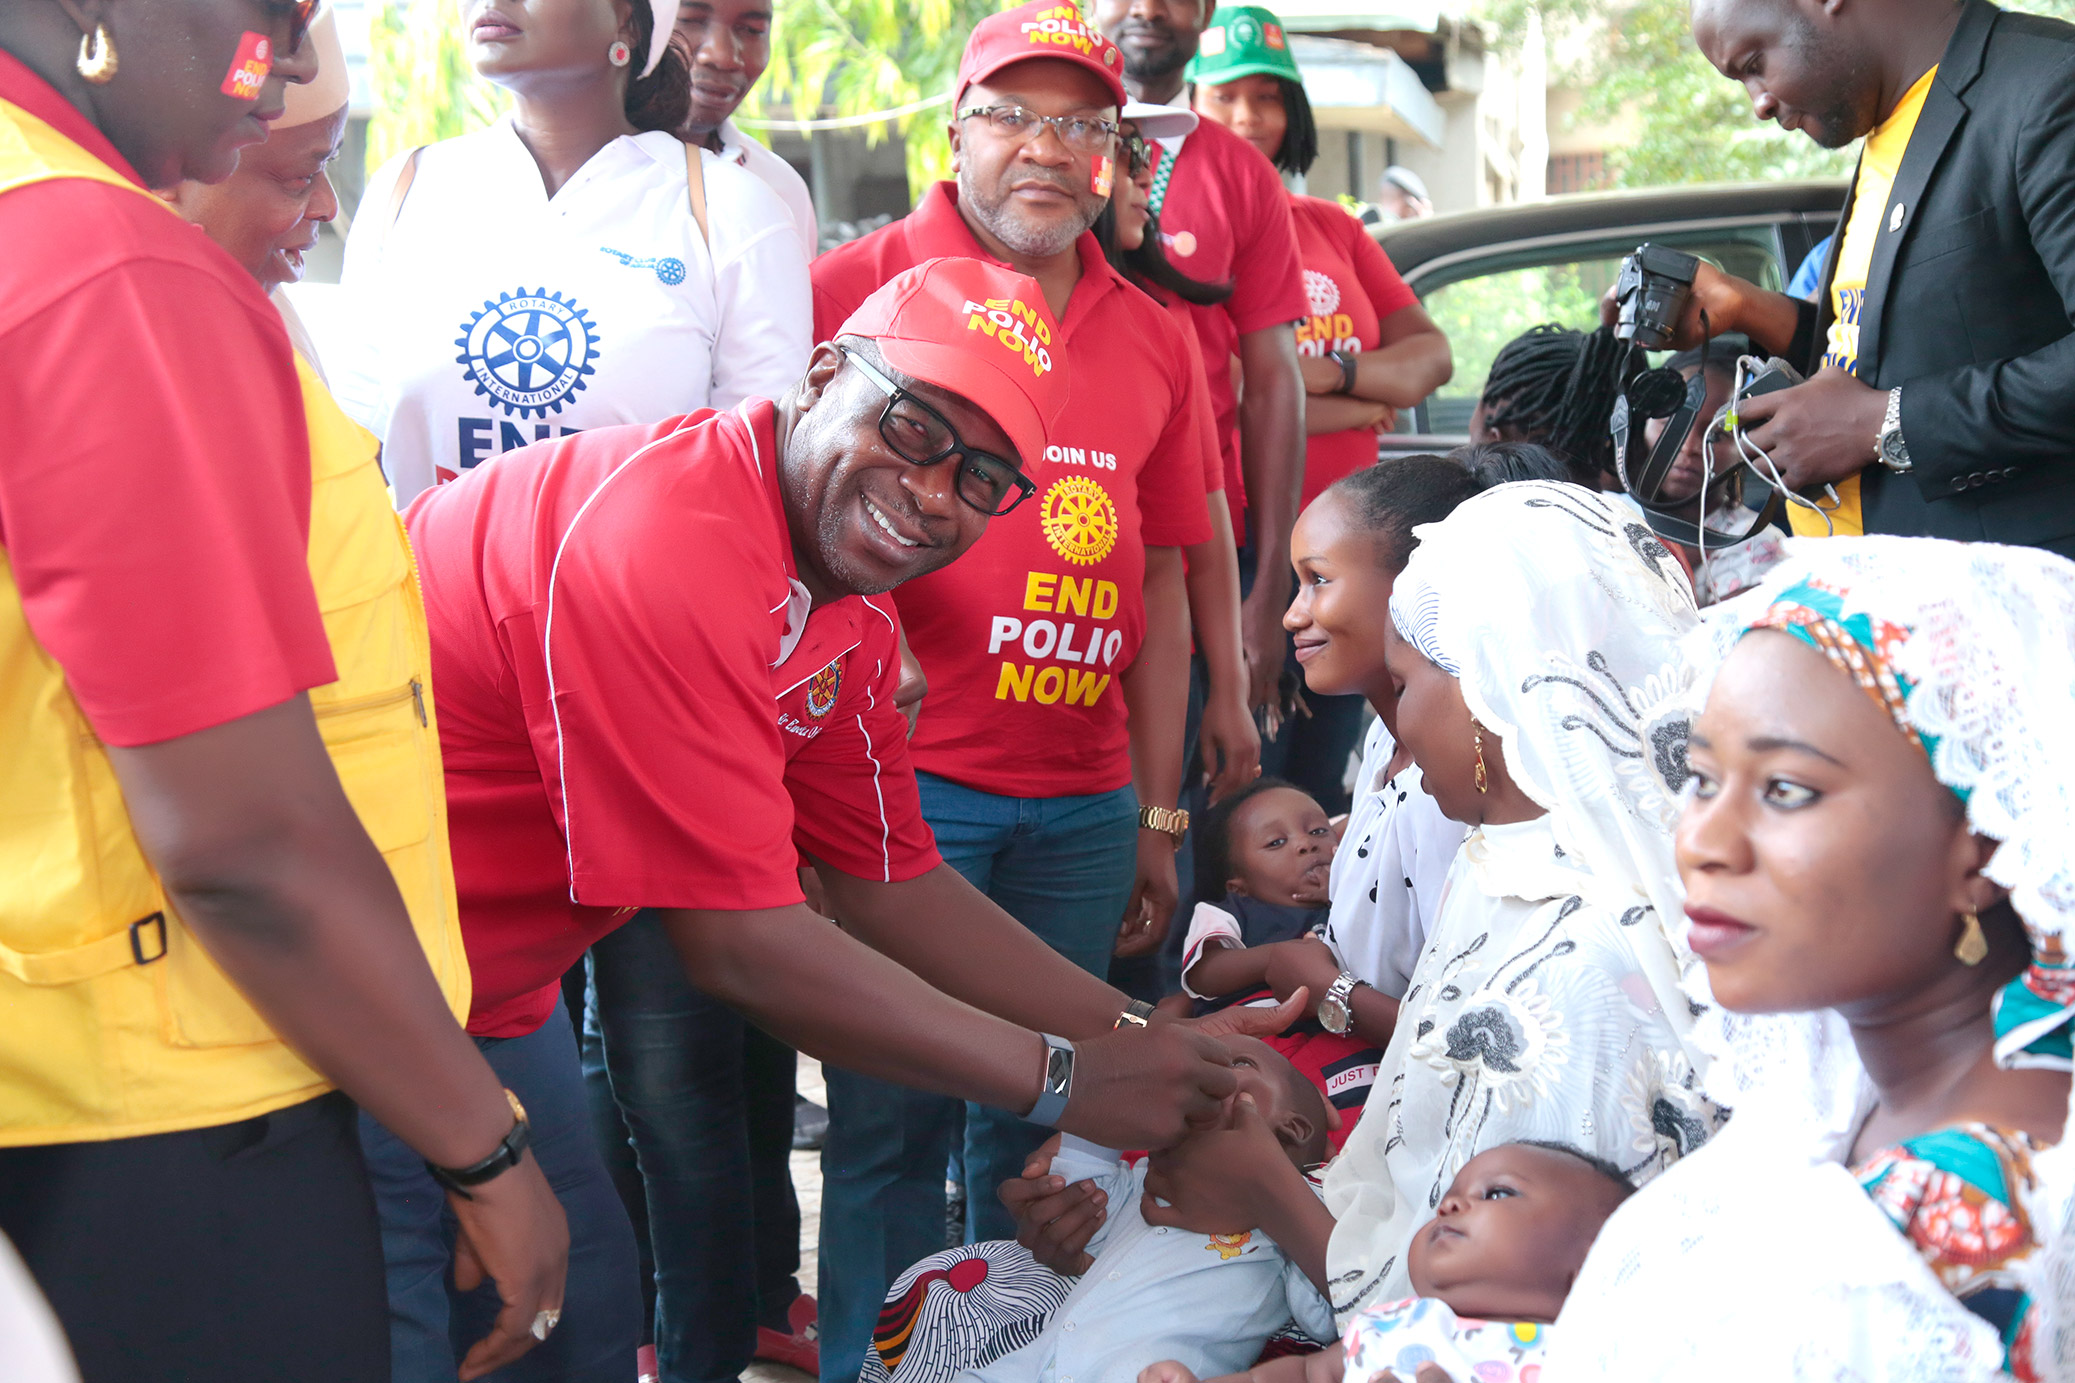 Sir Emeka Offor Foundation Joins Rotary to Mark 2018 World Polio Day